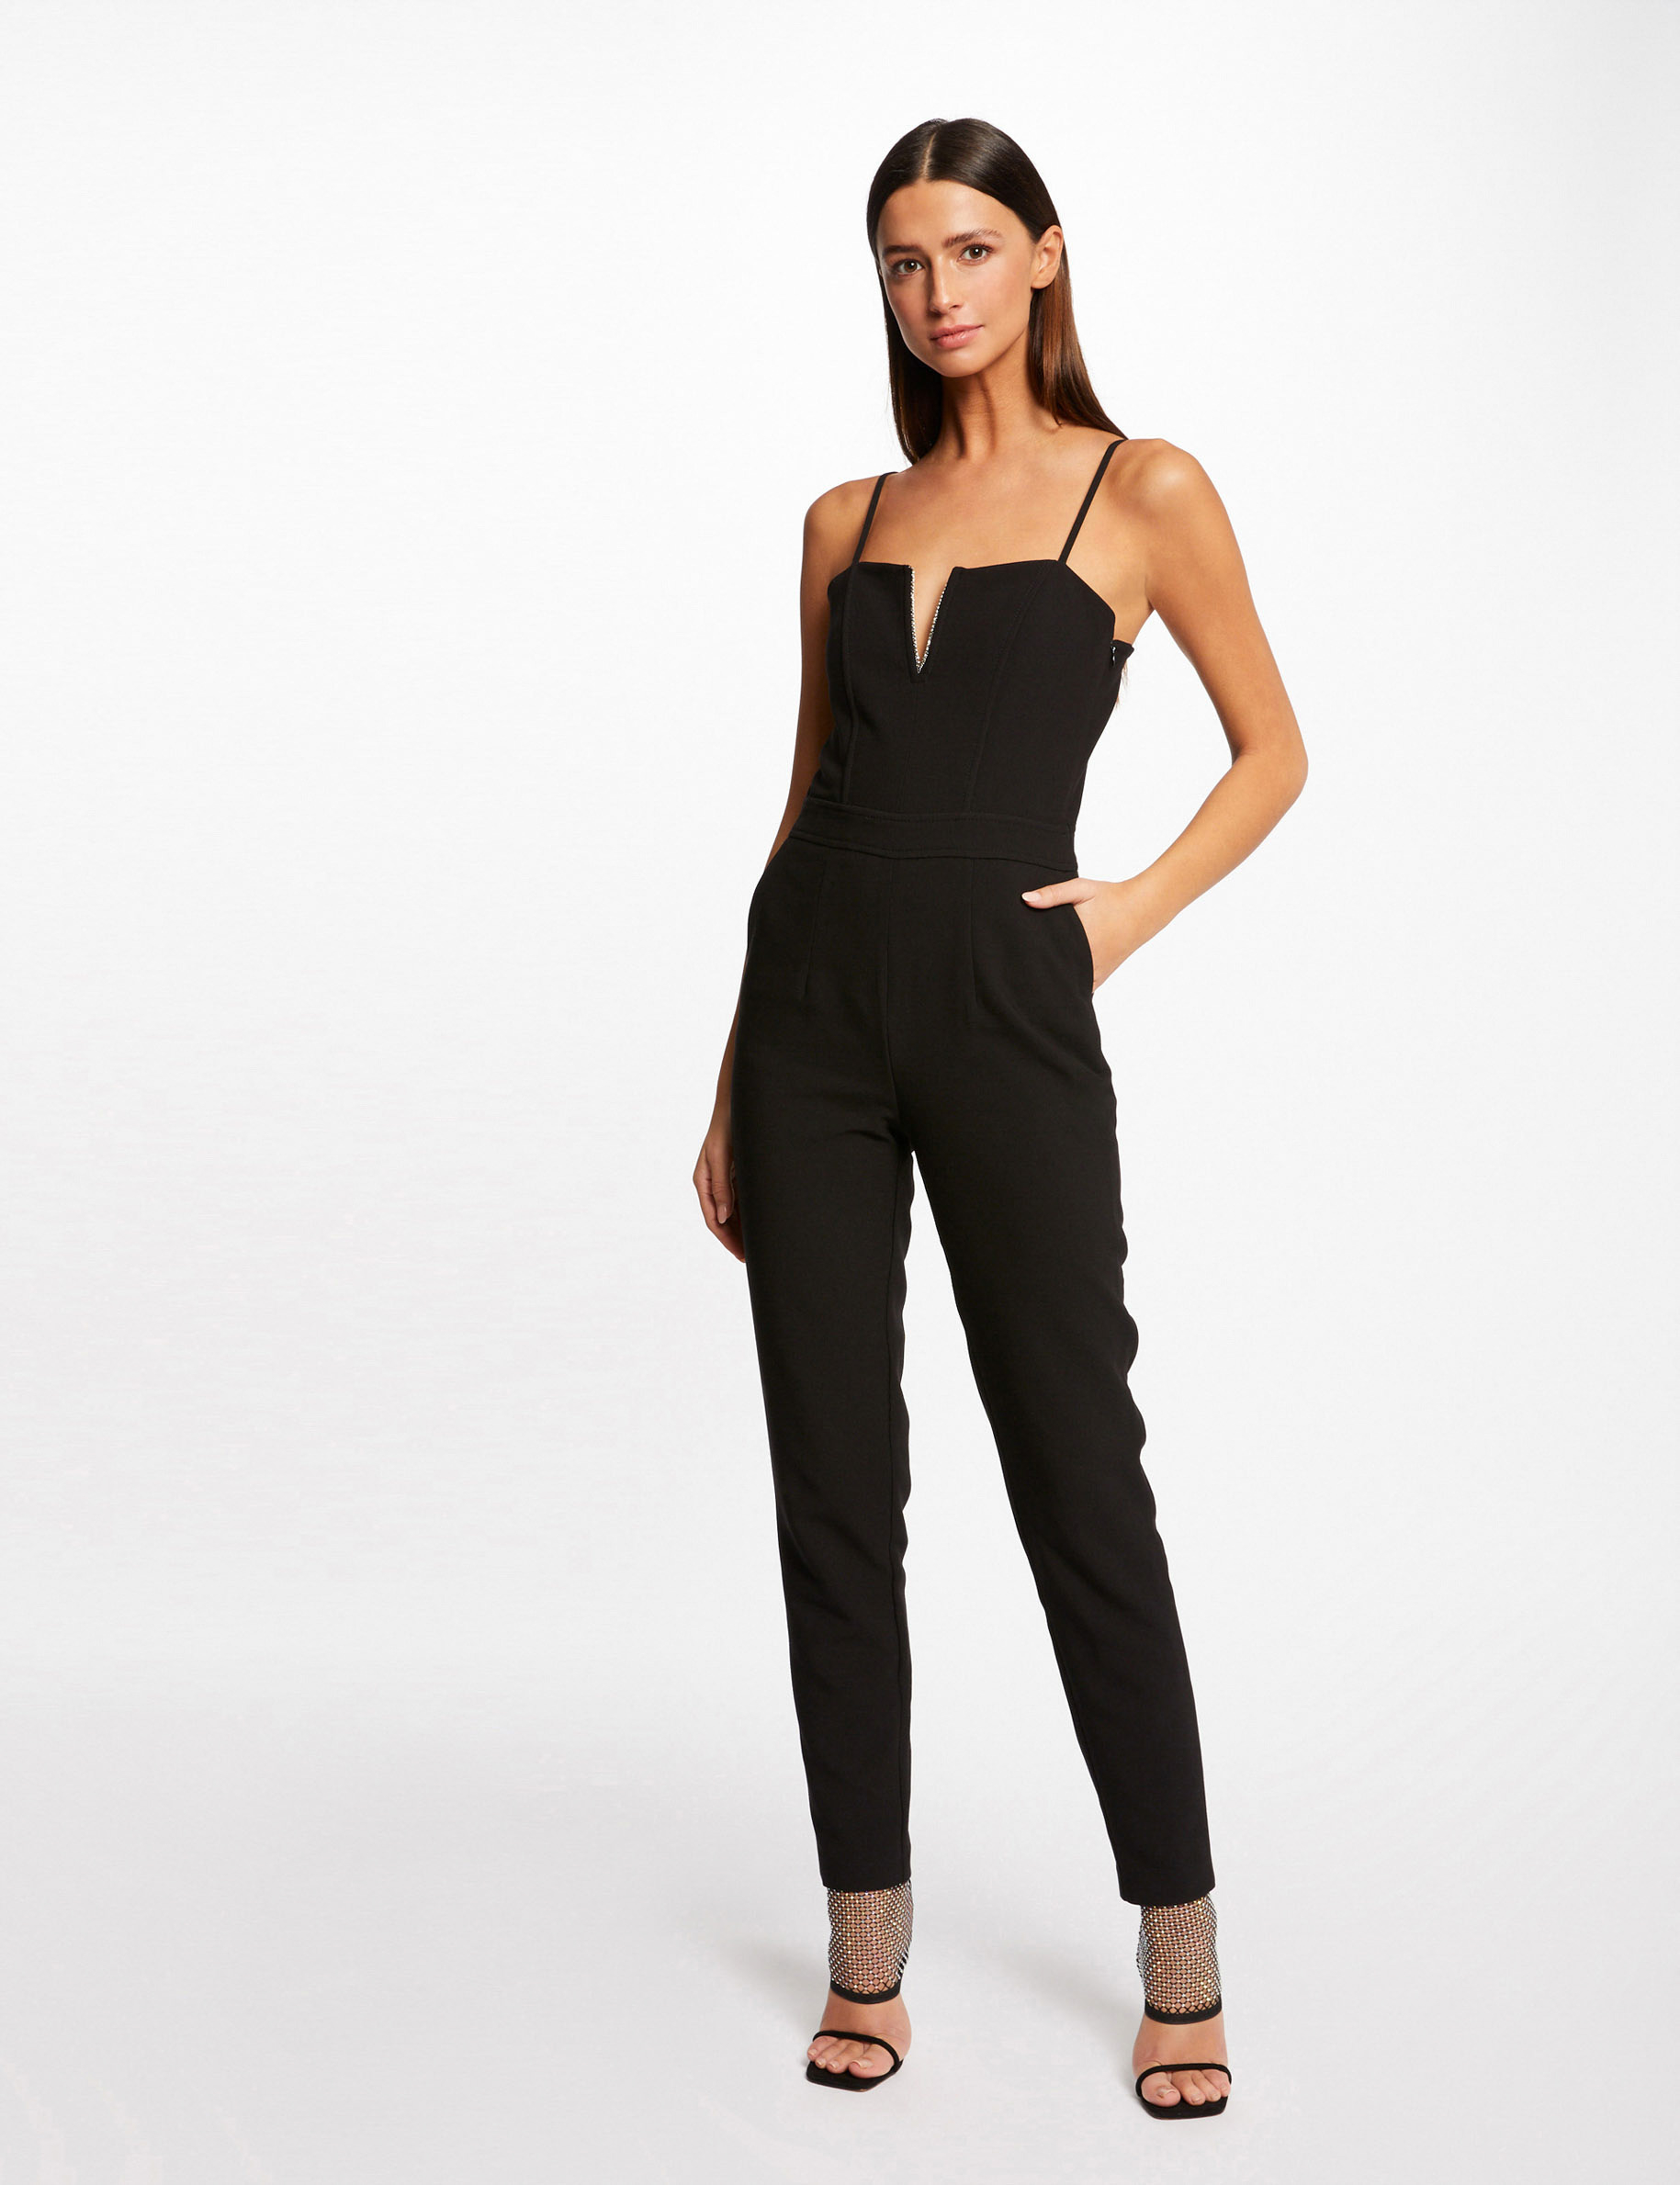 Fitted jumpsuit wih thin straps black ladies'